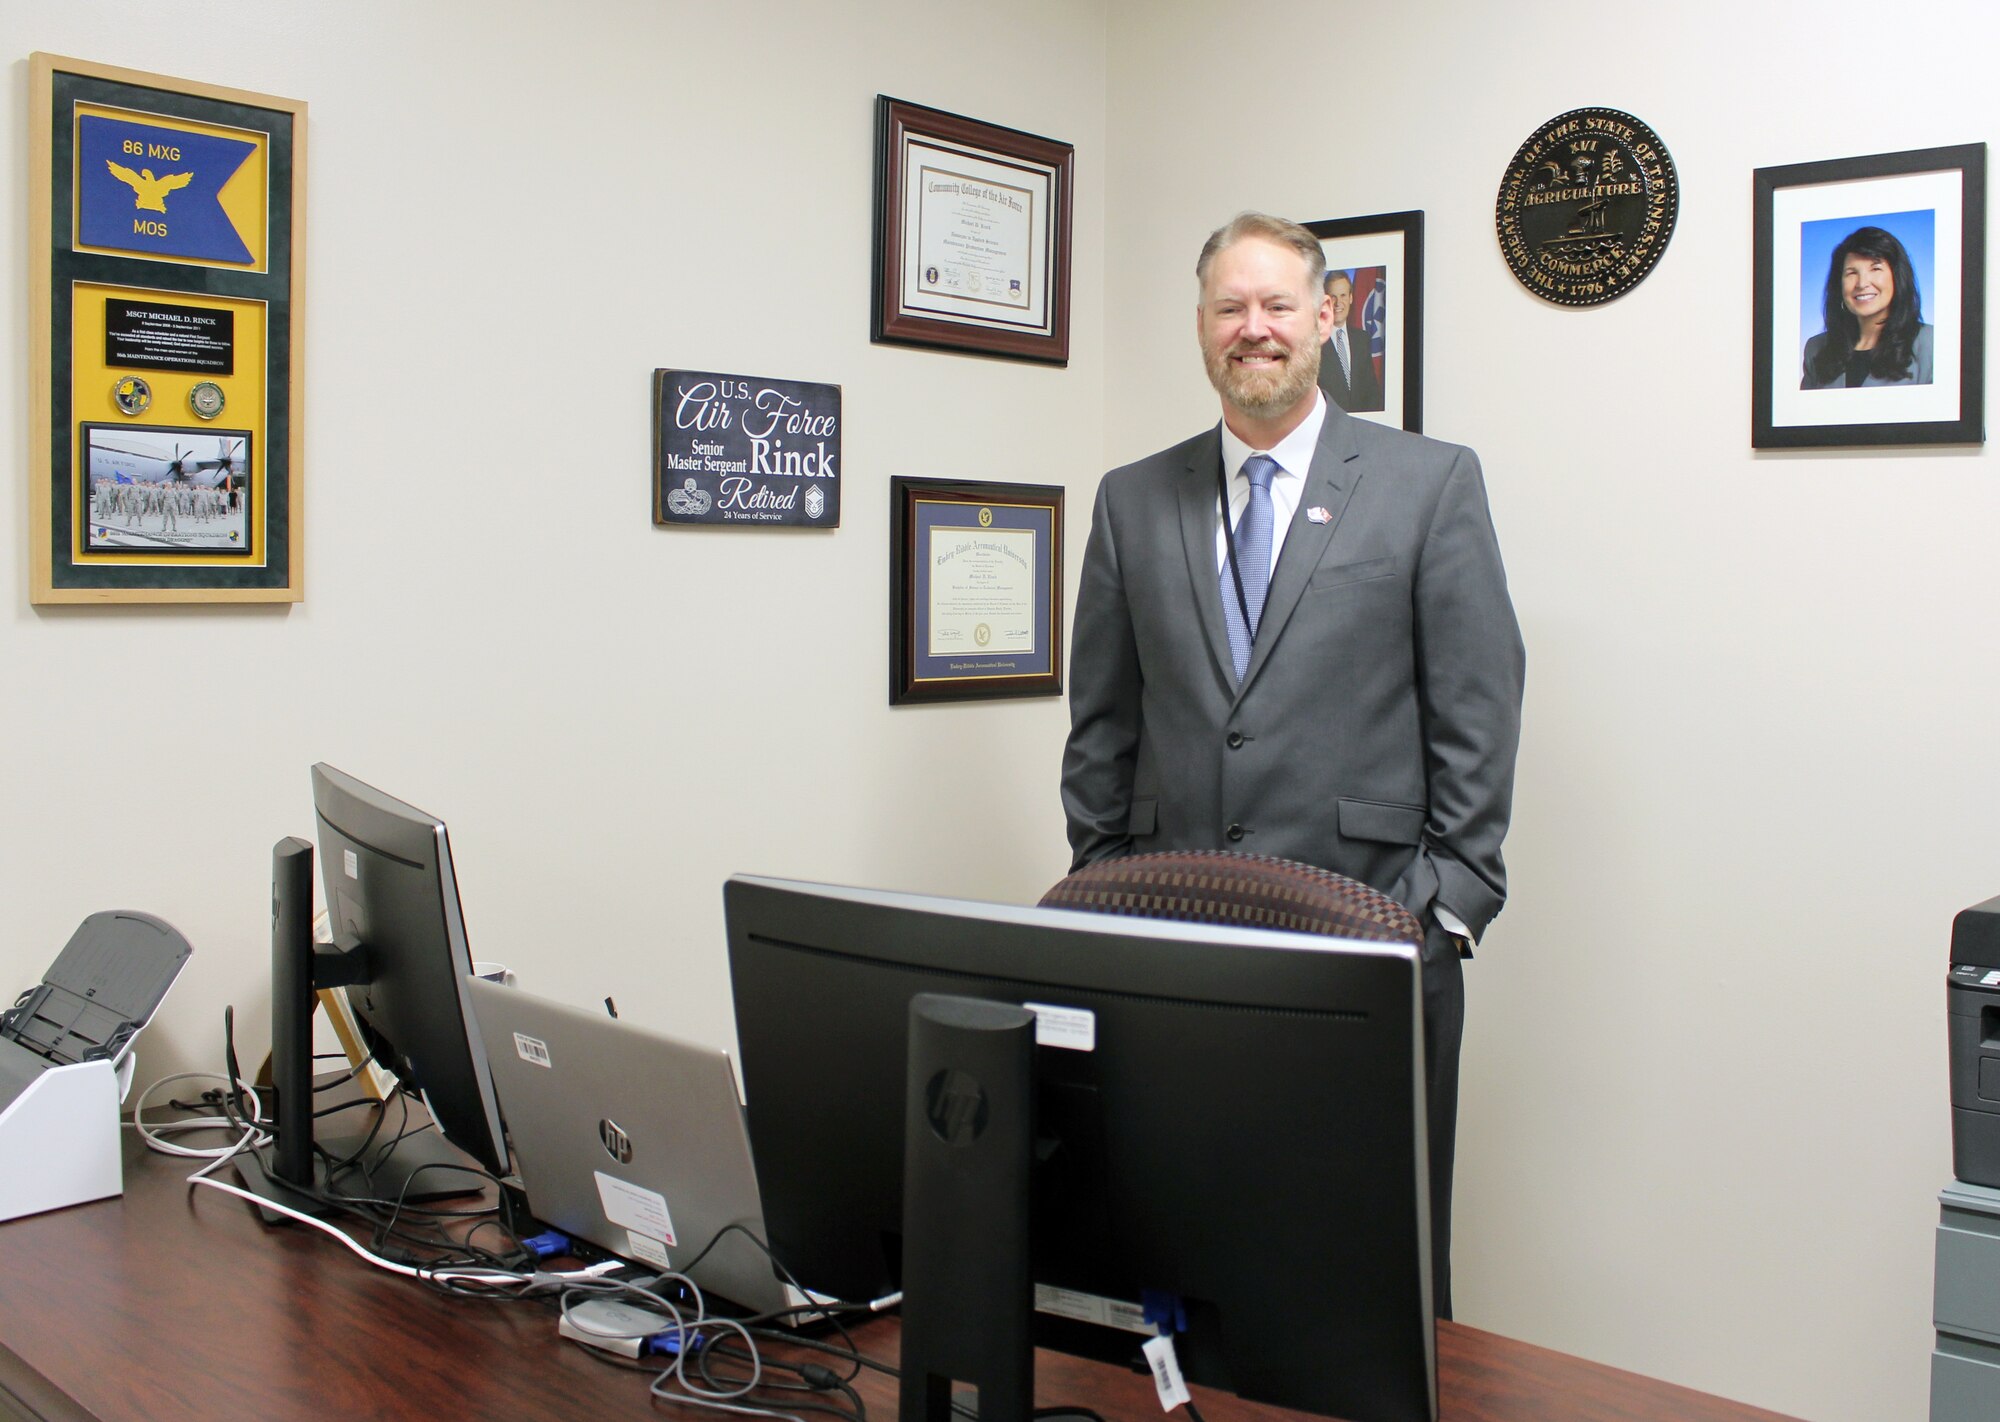 Michael Rinck, veterans resource coordinator, stands in the new Tennessee Department of Veterans Services field office March 12, 2020, located in the Medical Aid Station at Arnold Air Force Base, Tenn. The office will assist in providing benefits information and other important services for area veterans. (U.S. Air Force photo by Deidre Moon)